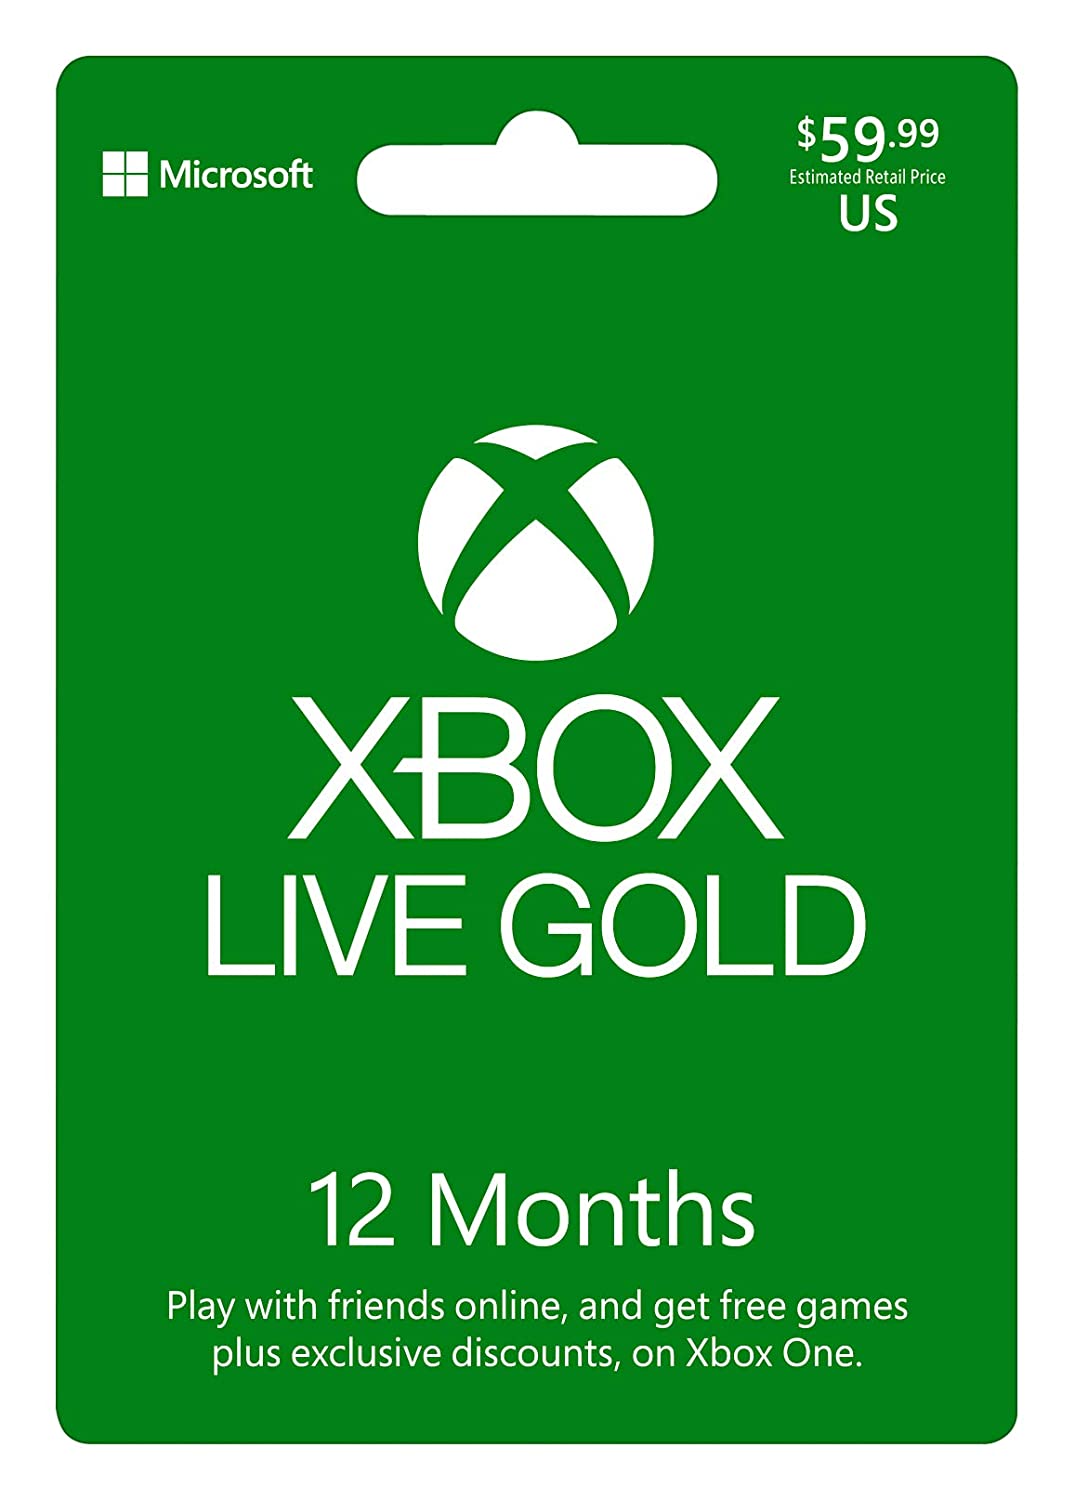 How Much Is Xbox Live Gold Family Pack Uk?